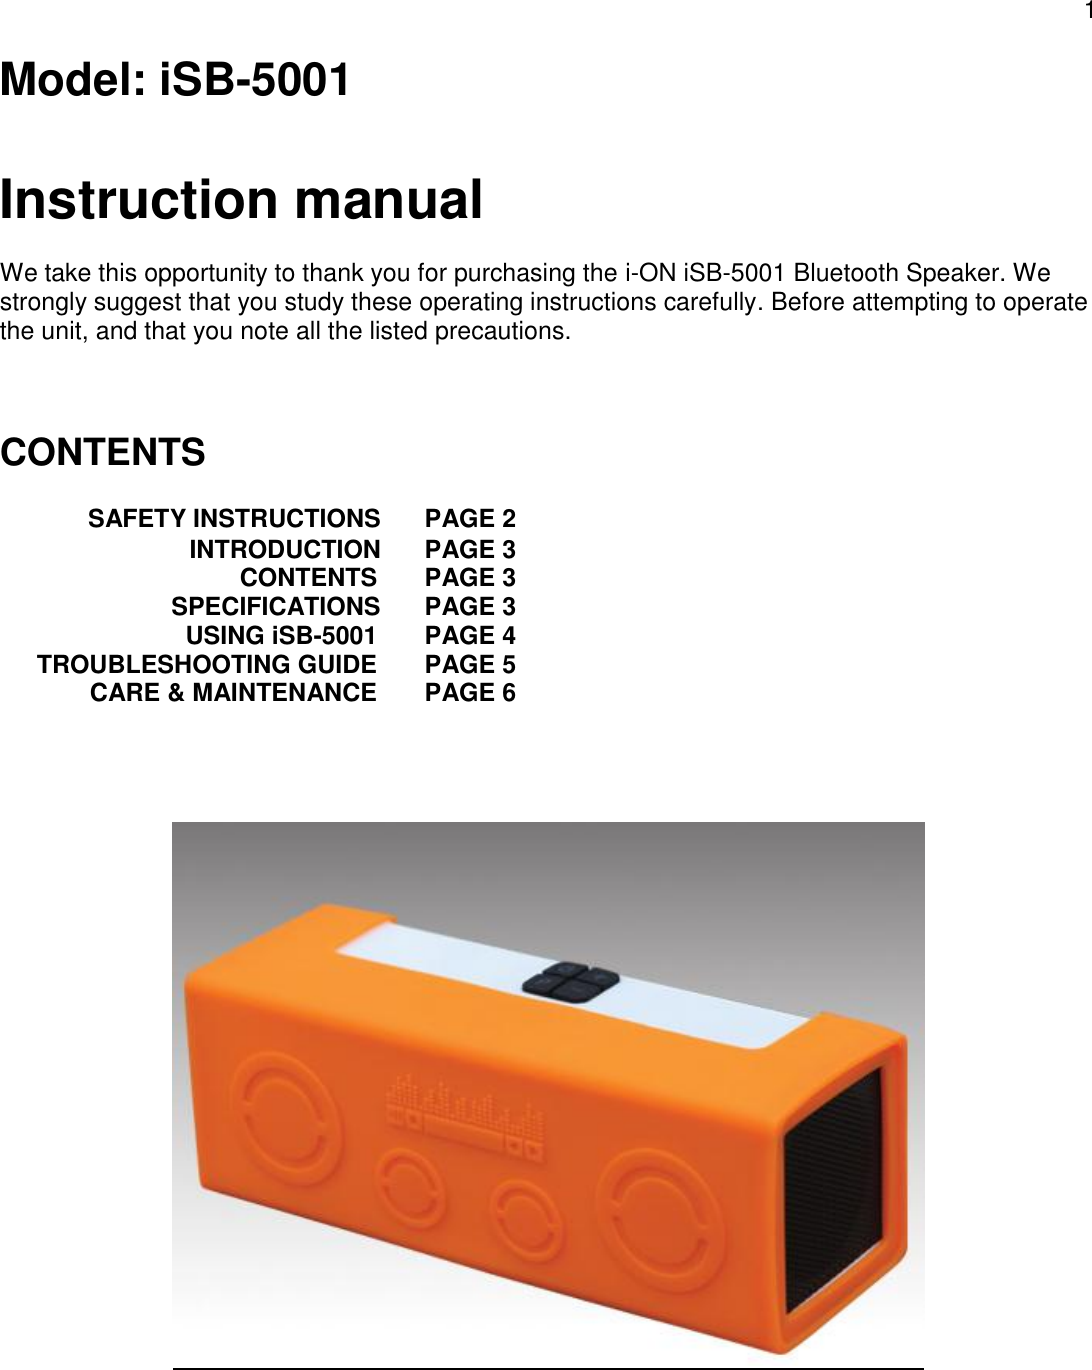 1  Model: iSB-5001  Instruction manual  We take this opportunity to thank you for purchasing the i-ON iSB-5001 Bluetooth Speaker. We strongly suggest that you study these operating instructions carefully. Before attempting to operate the unit, and that you note all the listed precautions.    CONTENTS     SAFETY INSTRUCTIONS PAGE 2  INTRODUCTION PAGE 3 CONTENTS PAGE 3   SPECIFICATIONS PAGE 3 USING iSB-5001 PAGE 4 TROUBLESHOOTING GUIDE PAGE 5 CARE &amp; MAINTENANCE PAGE 6         